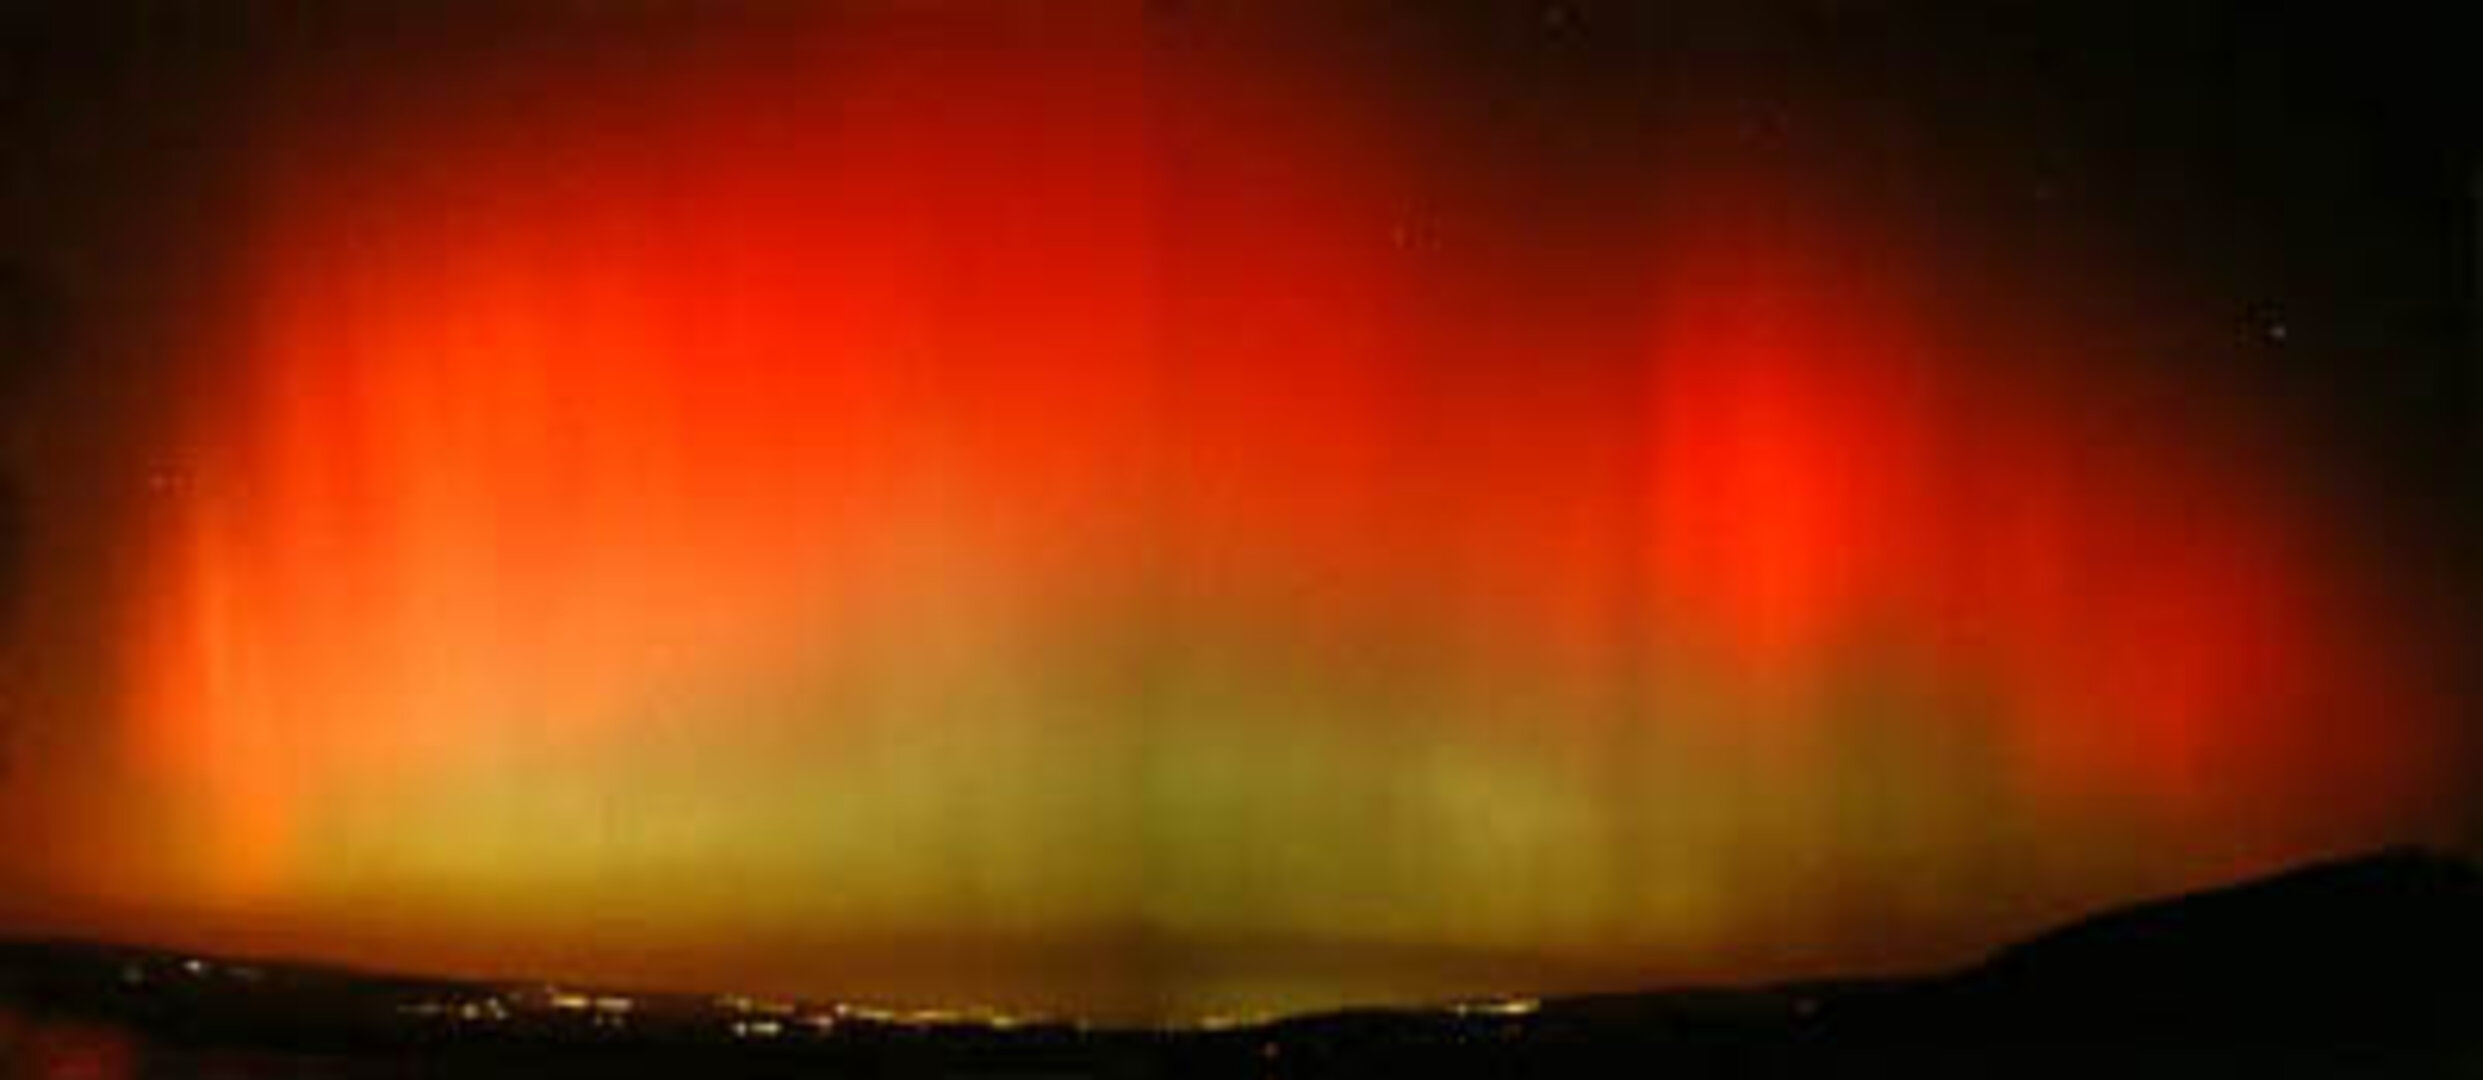 Shimmering curtains of red and green illuminate the long winter nights near the Arctic Circle